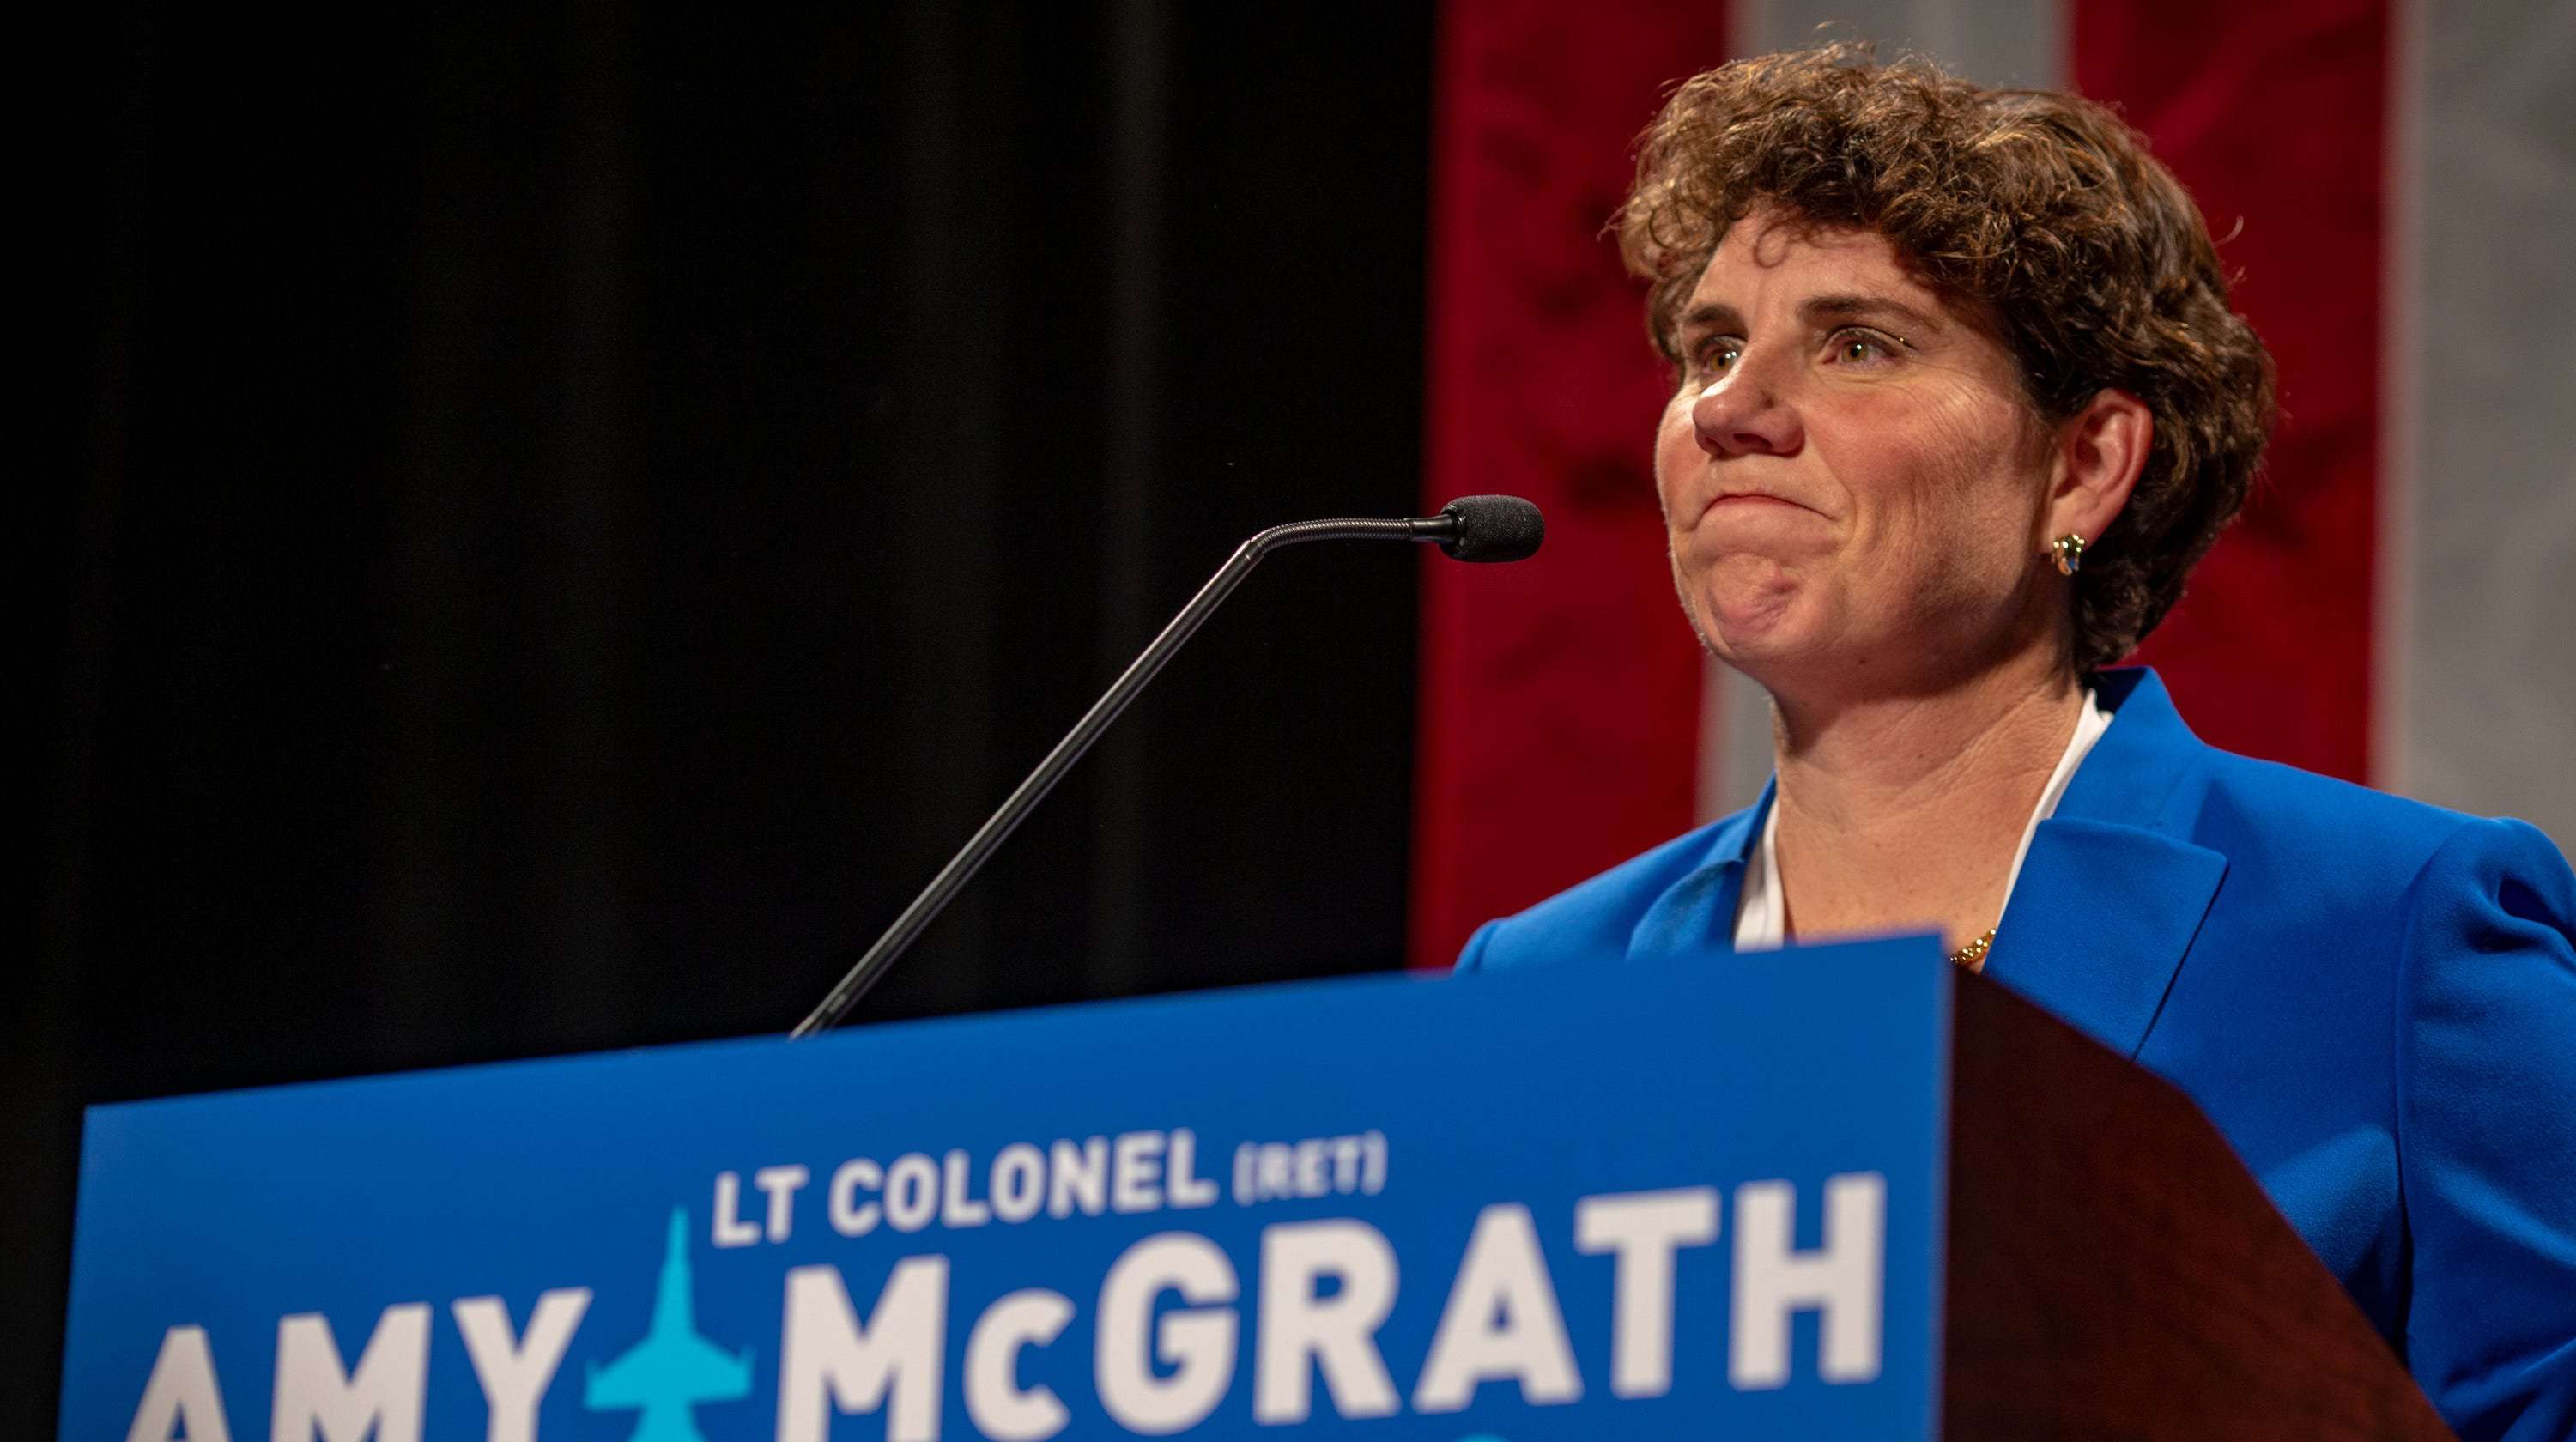 image for Amy McGrath 2020: Mitch McConnell to face senate election challenge